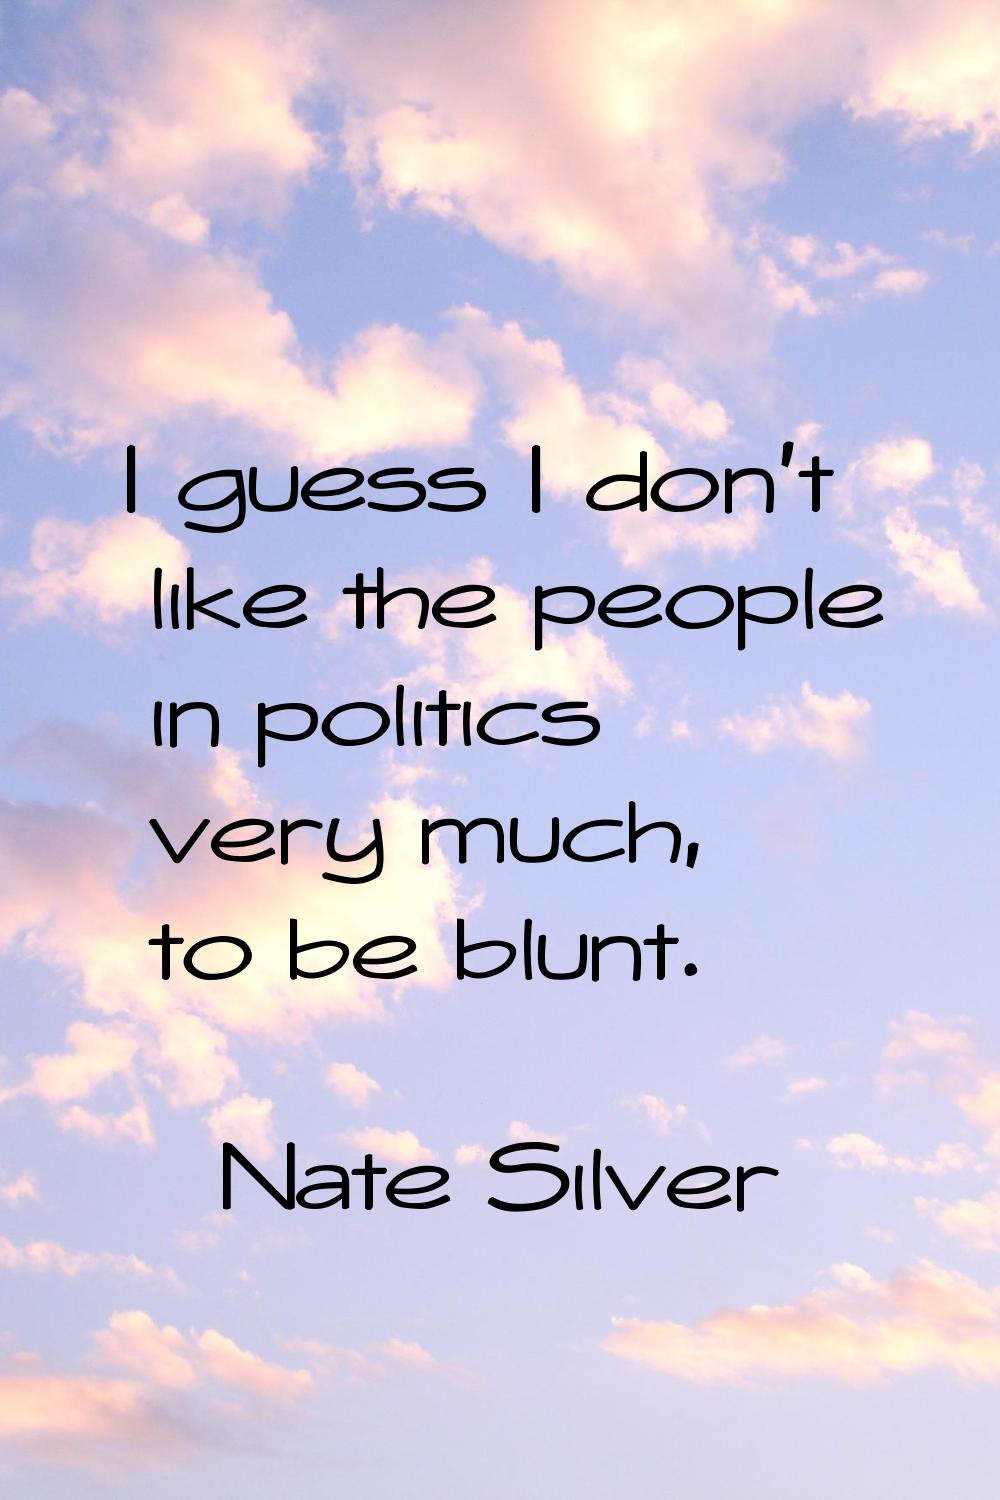 I guess I don't like the people in politics very much, to be blunt.